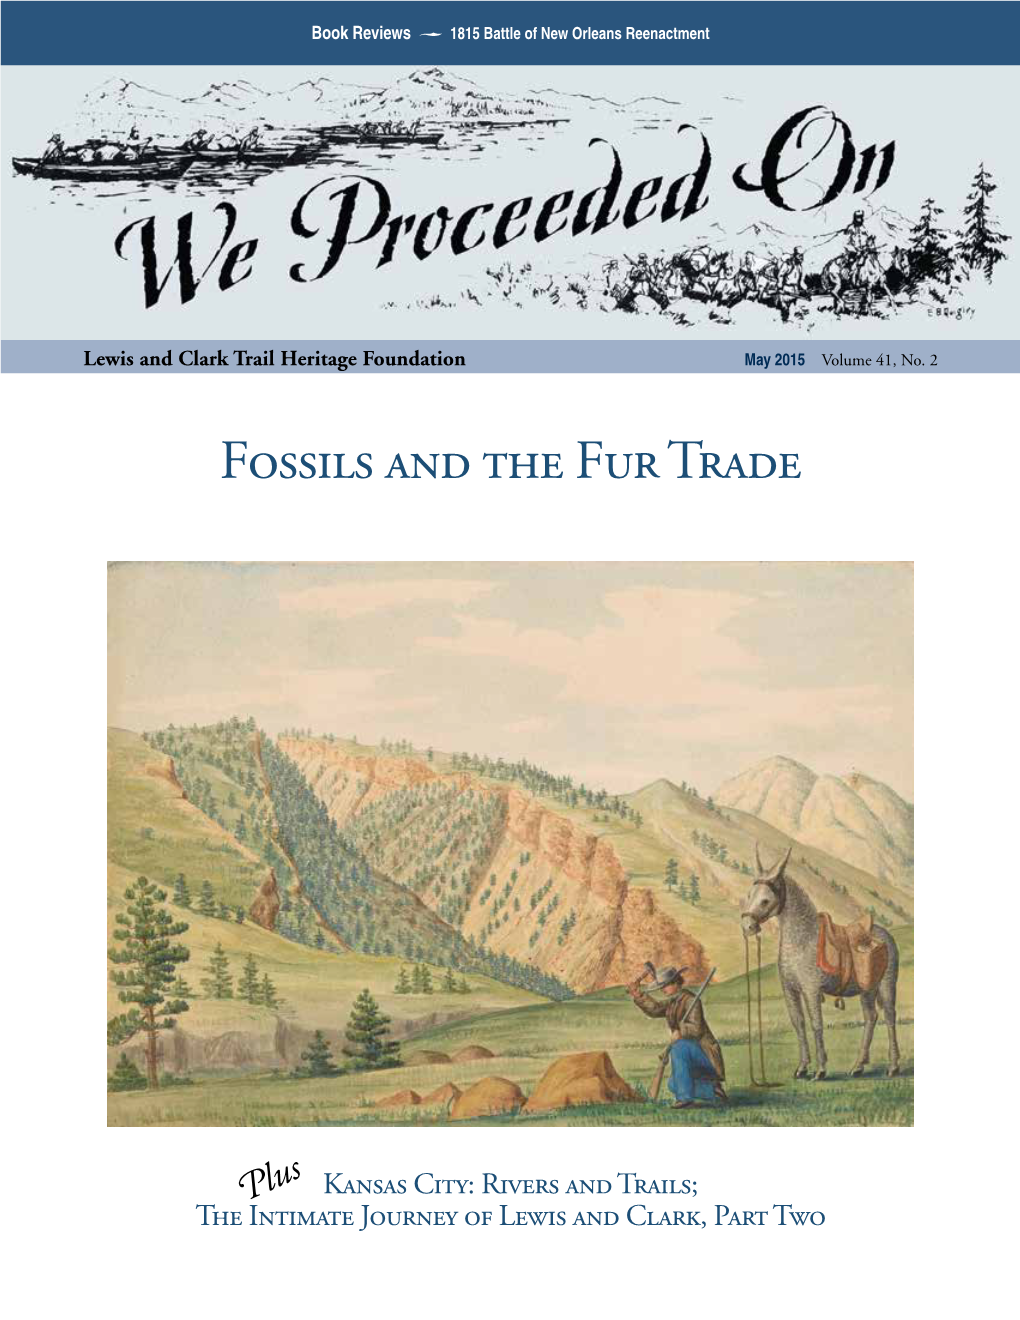 Fossils and the Fur Trade